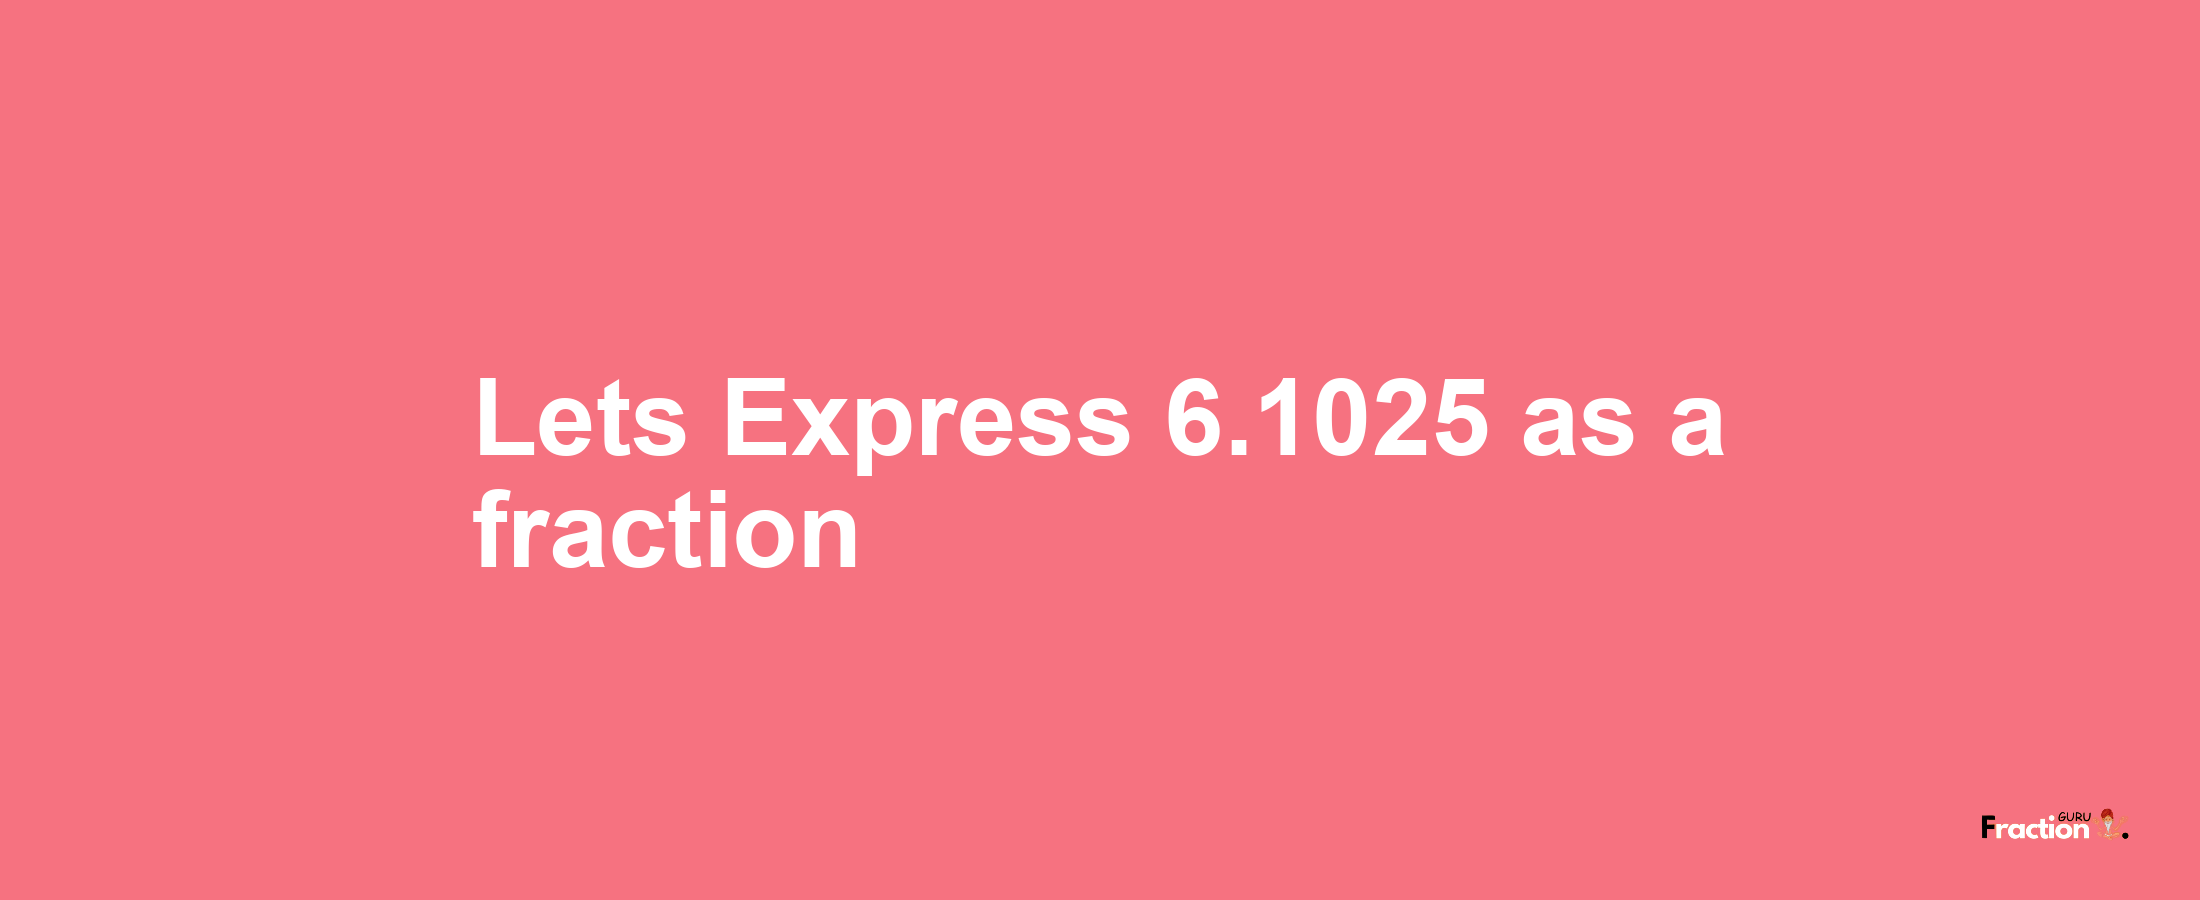 Lets Express 6.1025 as afraction